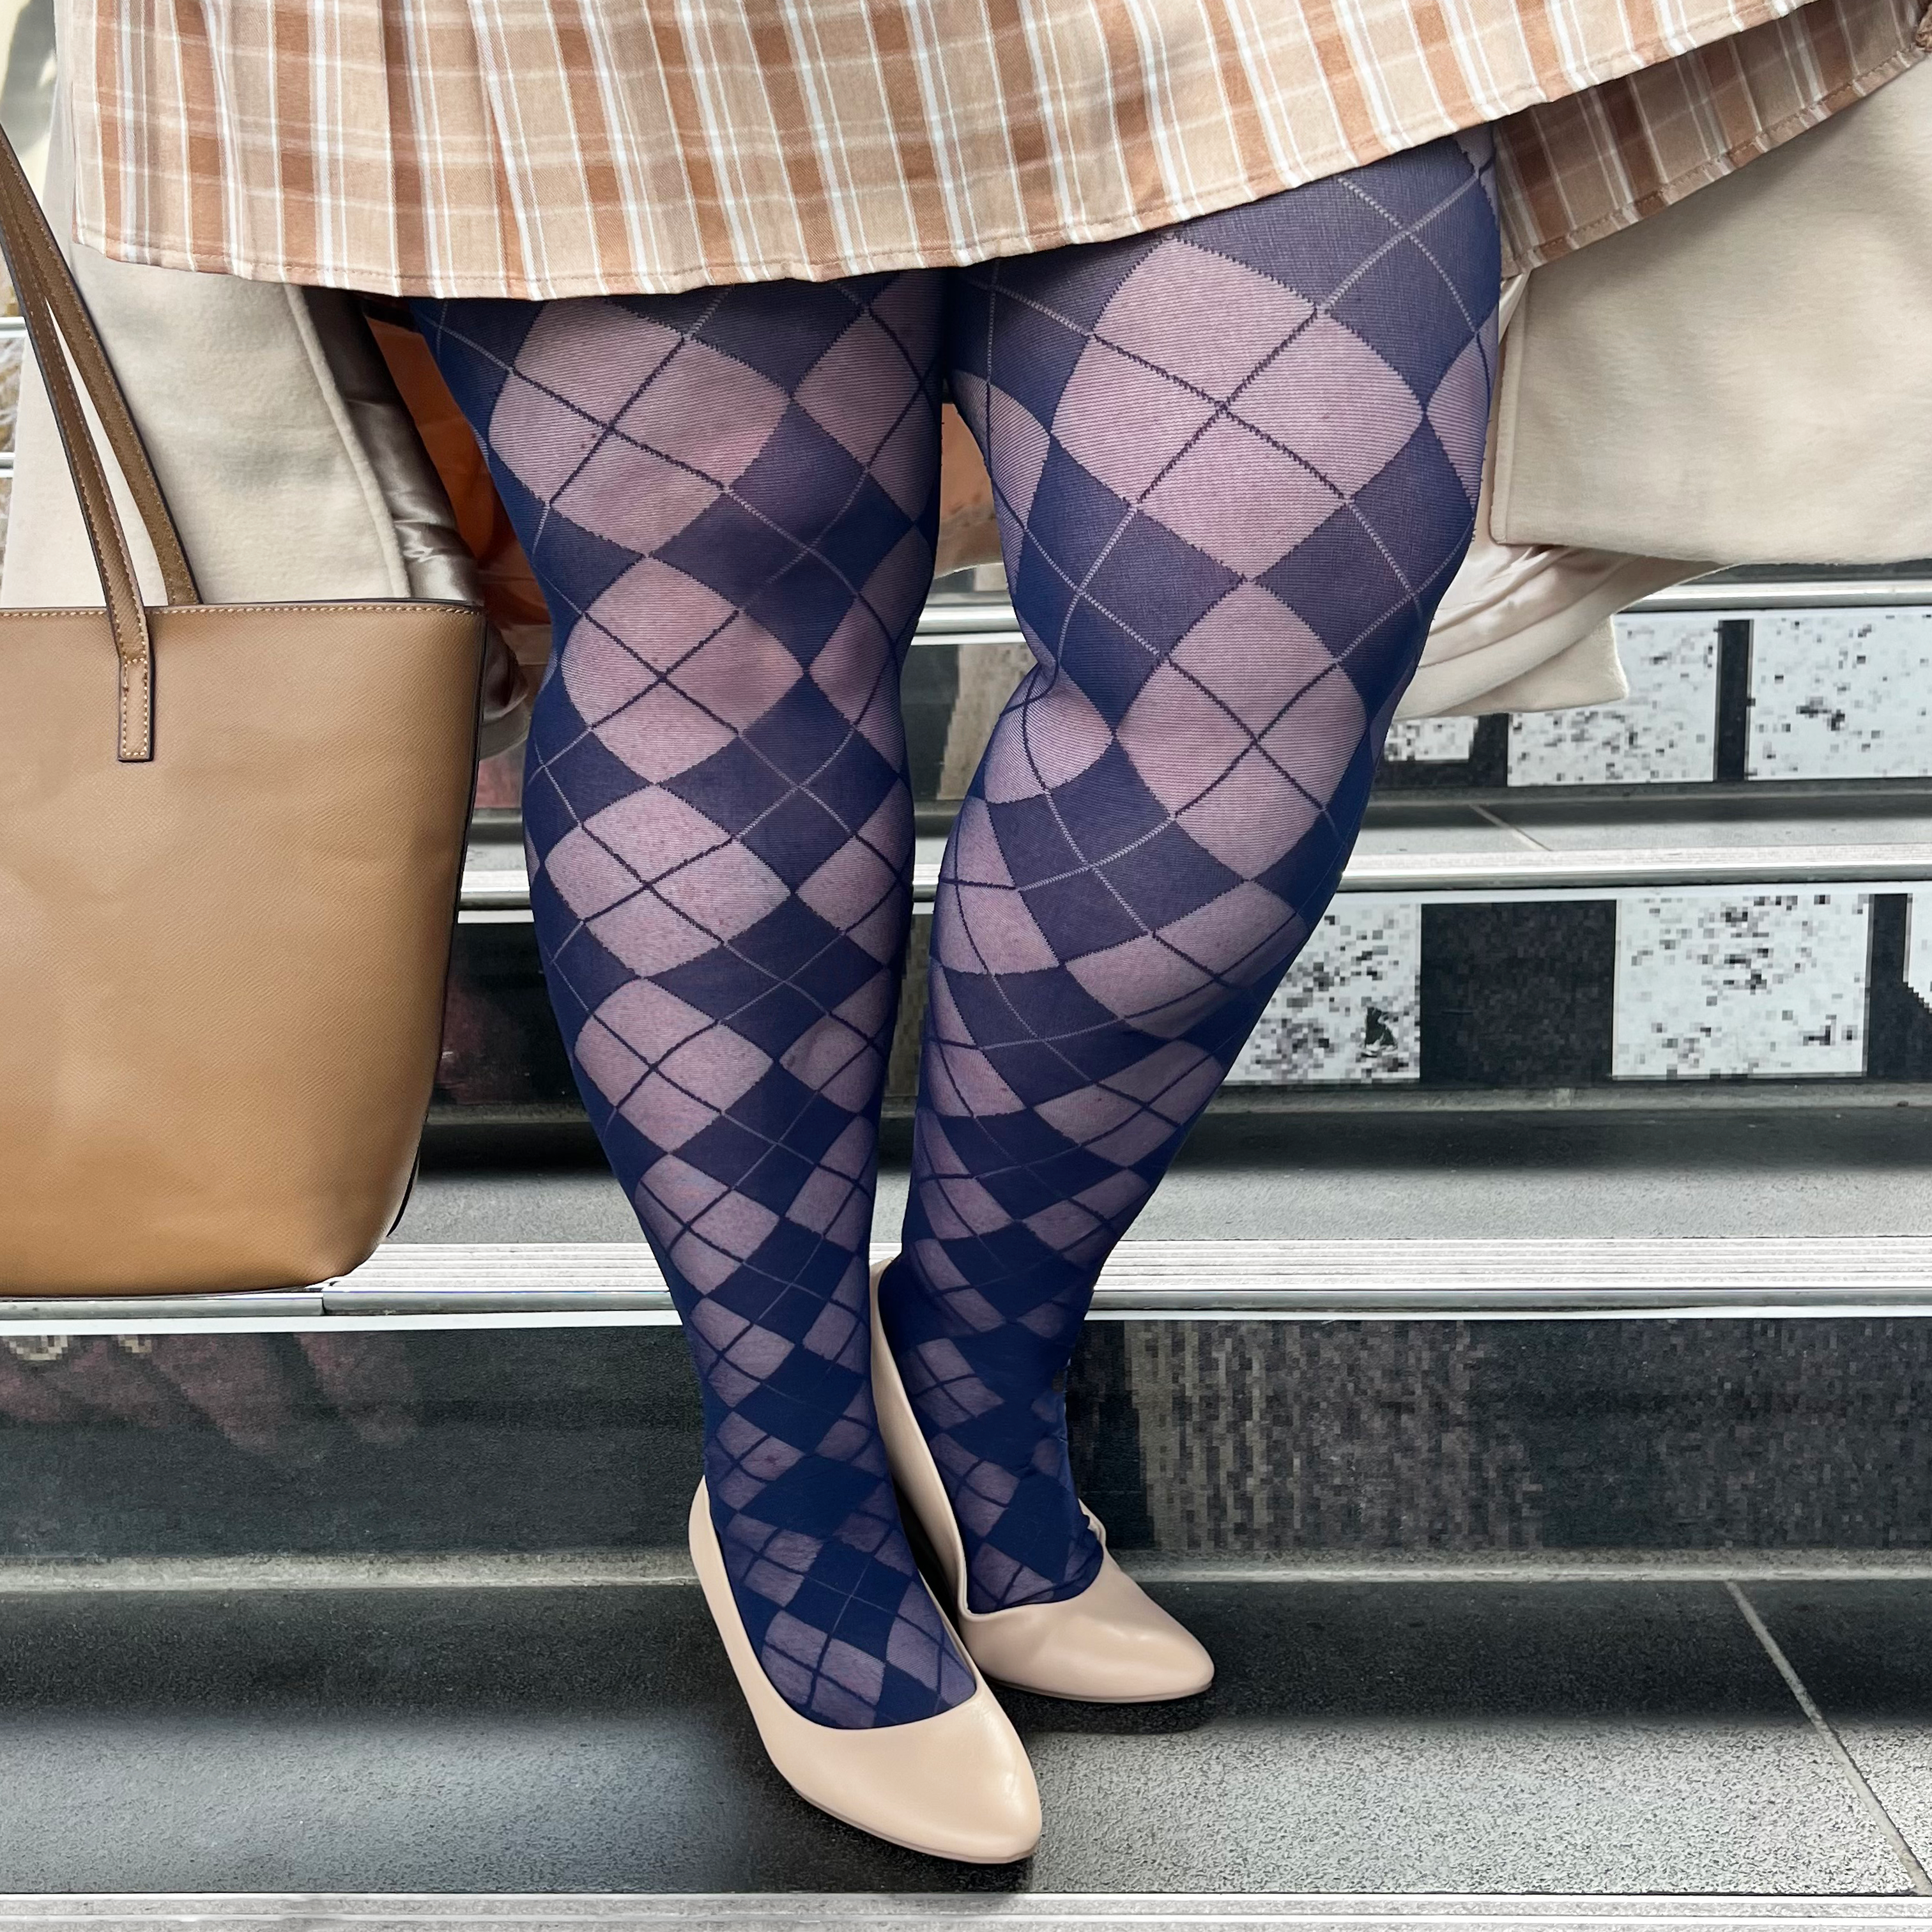 Fashion Tights / European made Women's Patterned Stockings in Australia and  New Zealand